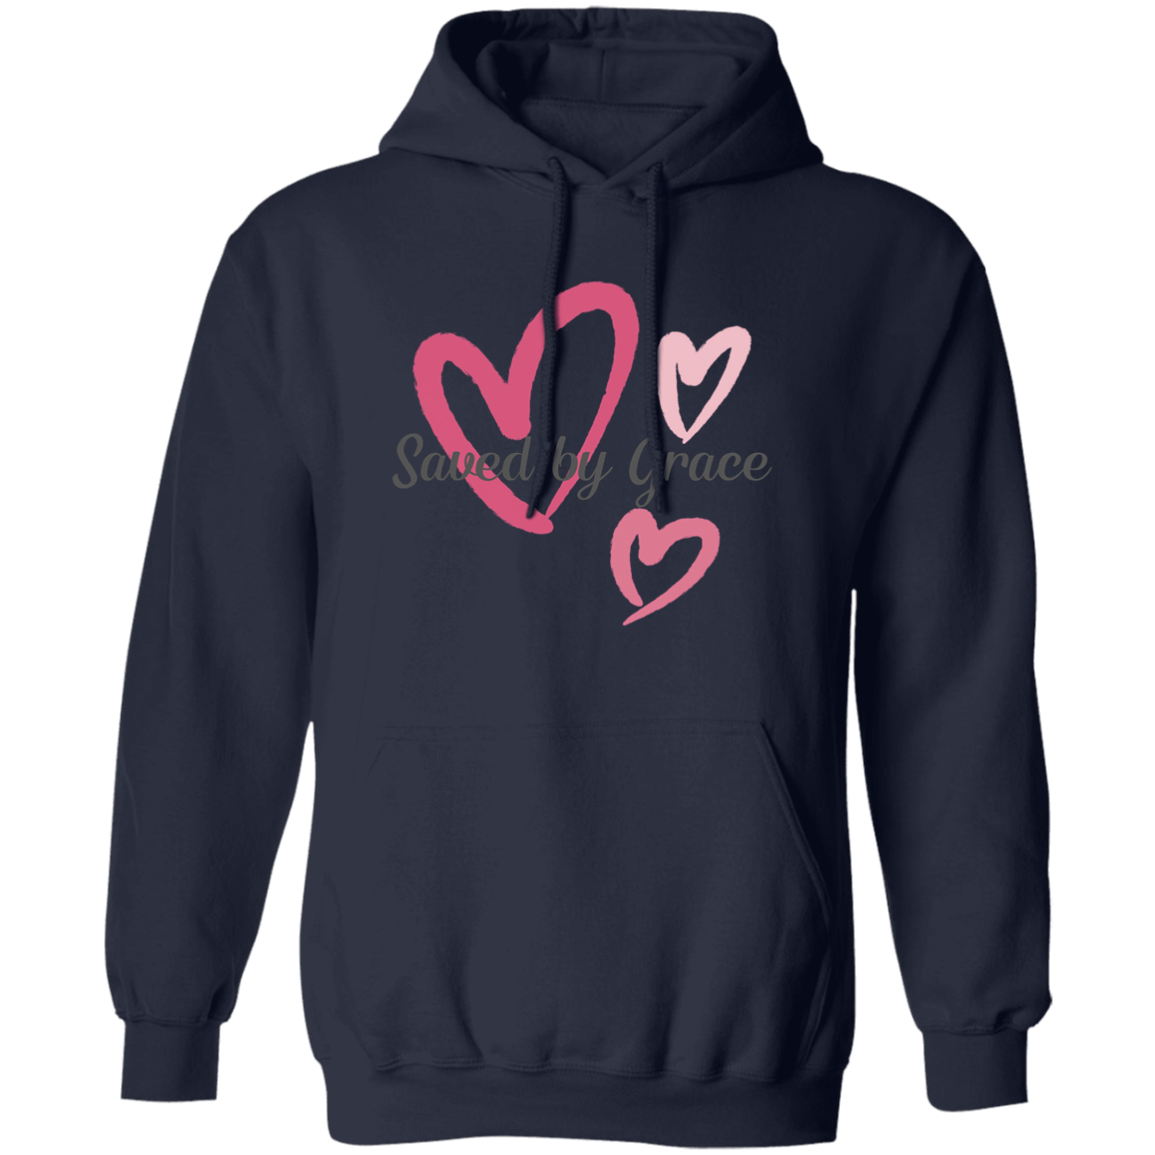 Saved by Grace Pullover Hoodie